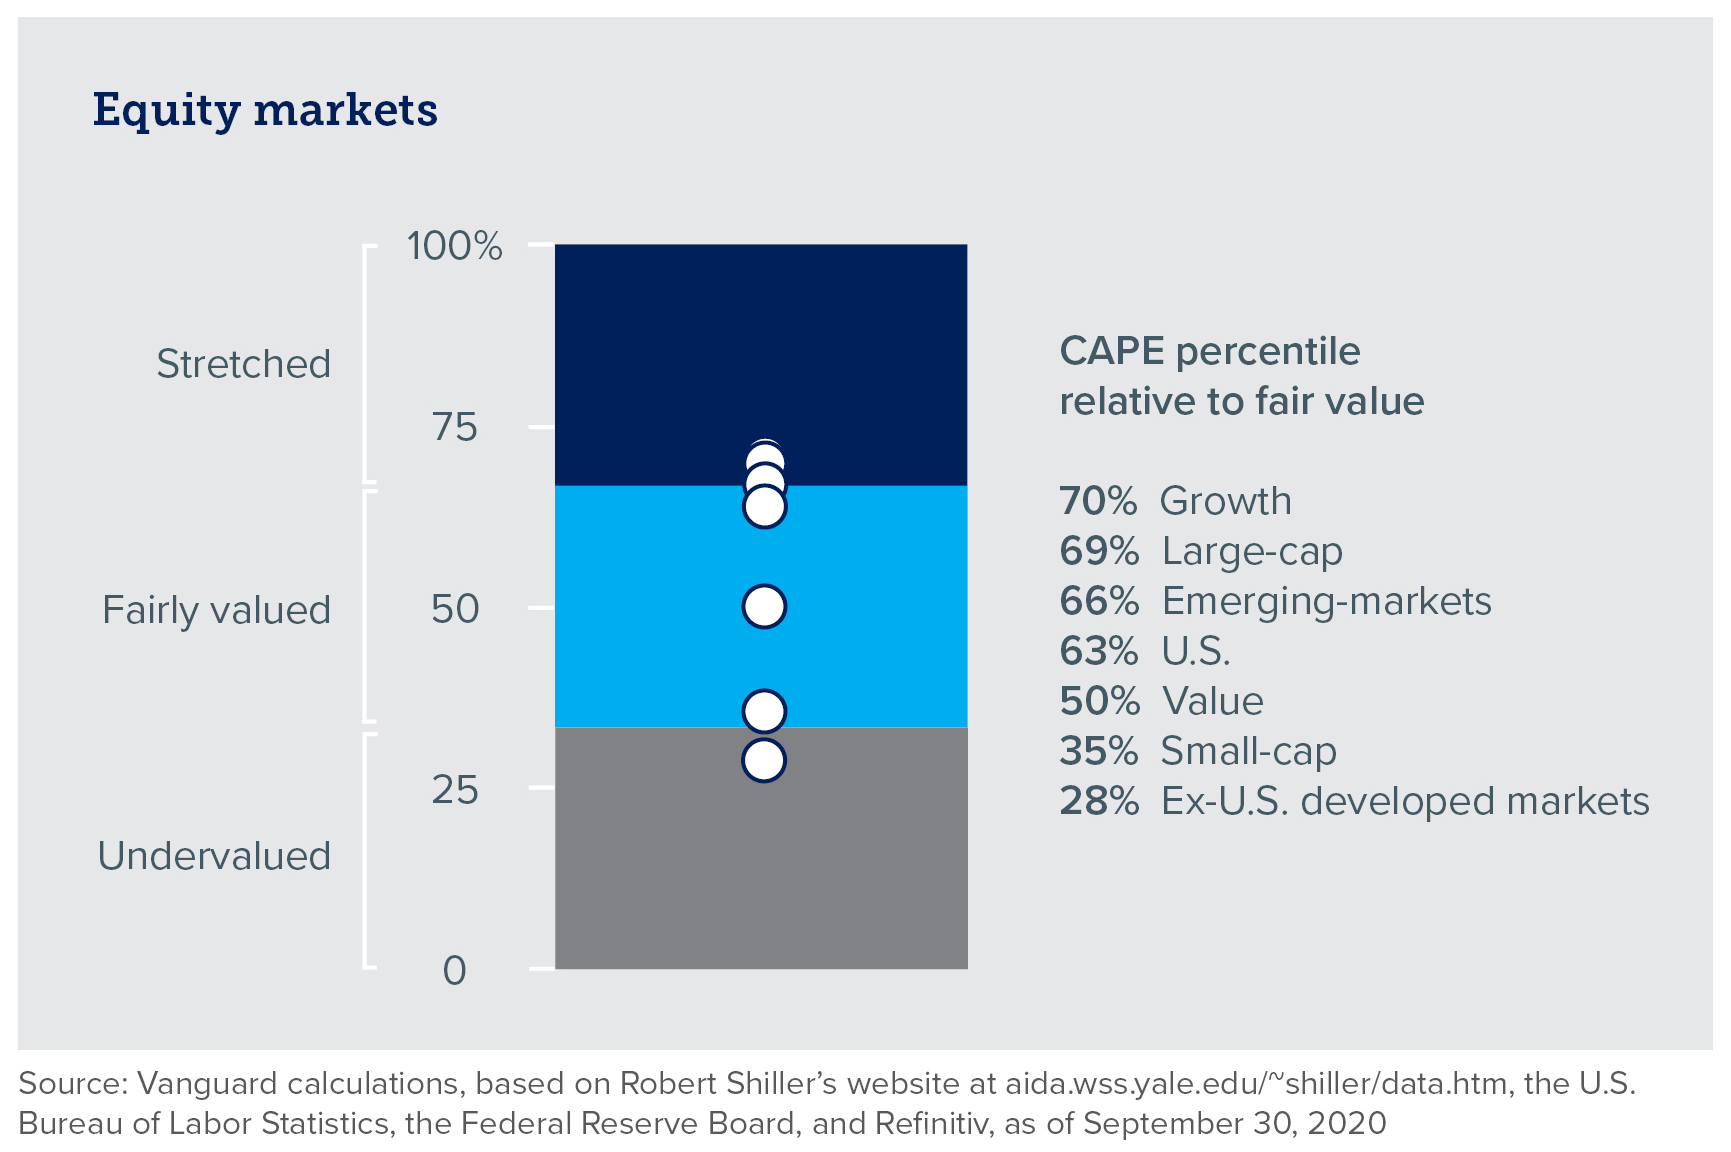 Equity valuations within markets